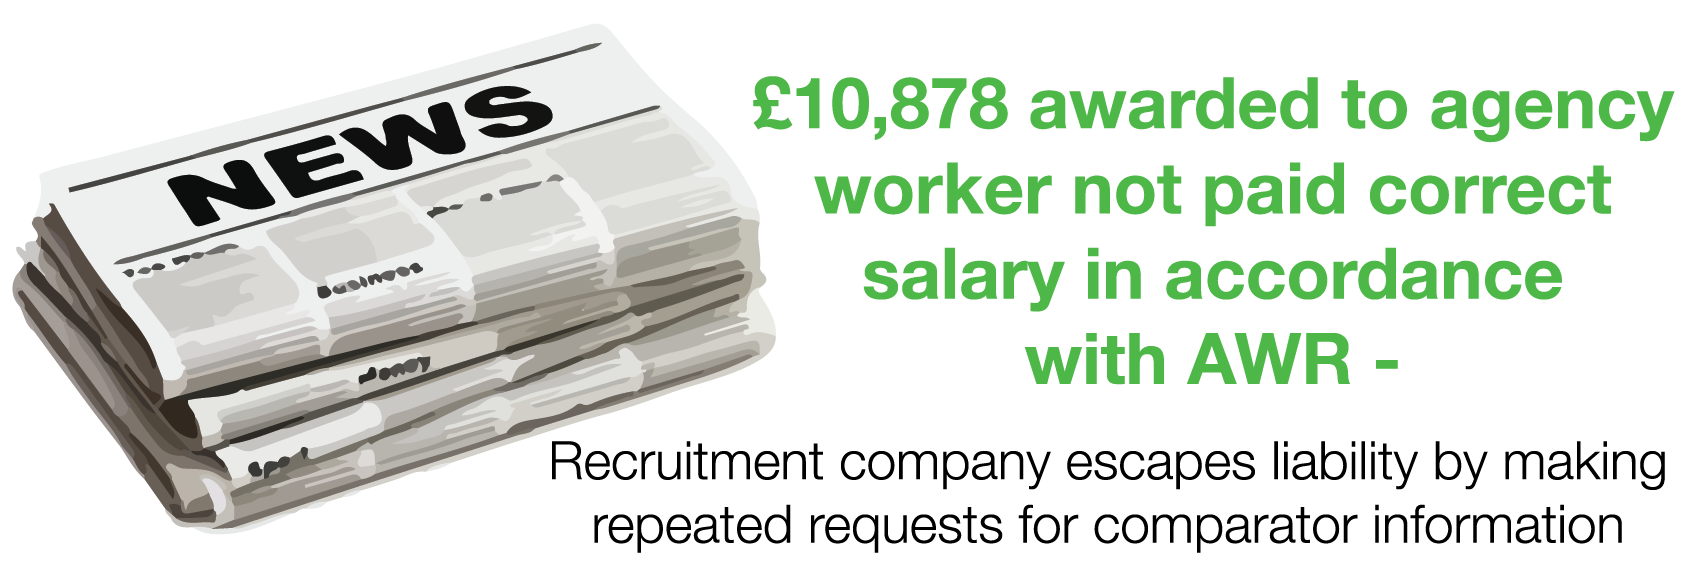 £10,878 awarded to agency worker not paid correct salary in accordance with AWR - Recruitment company escapes liability by making repeated requests for comparator information